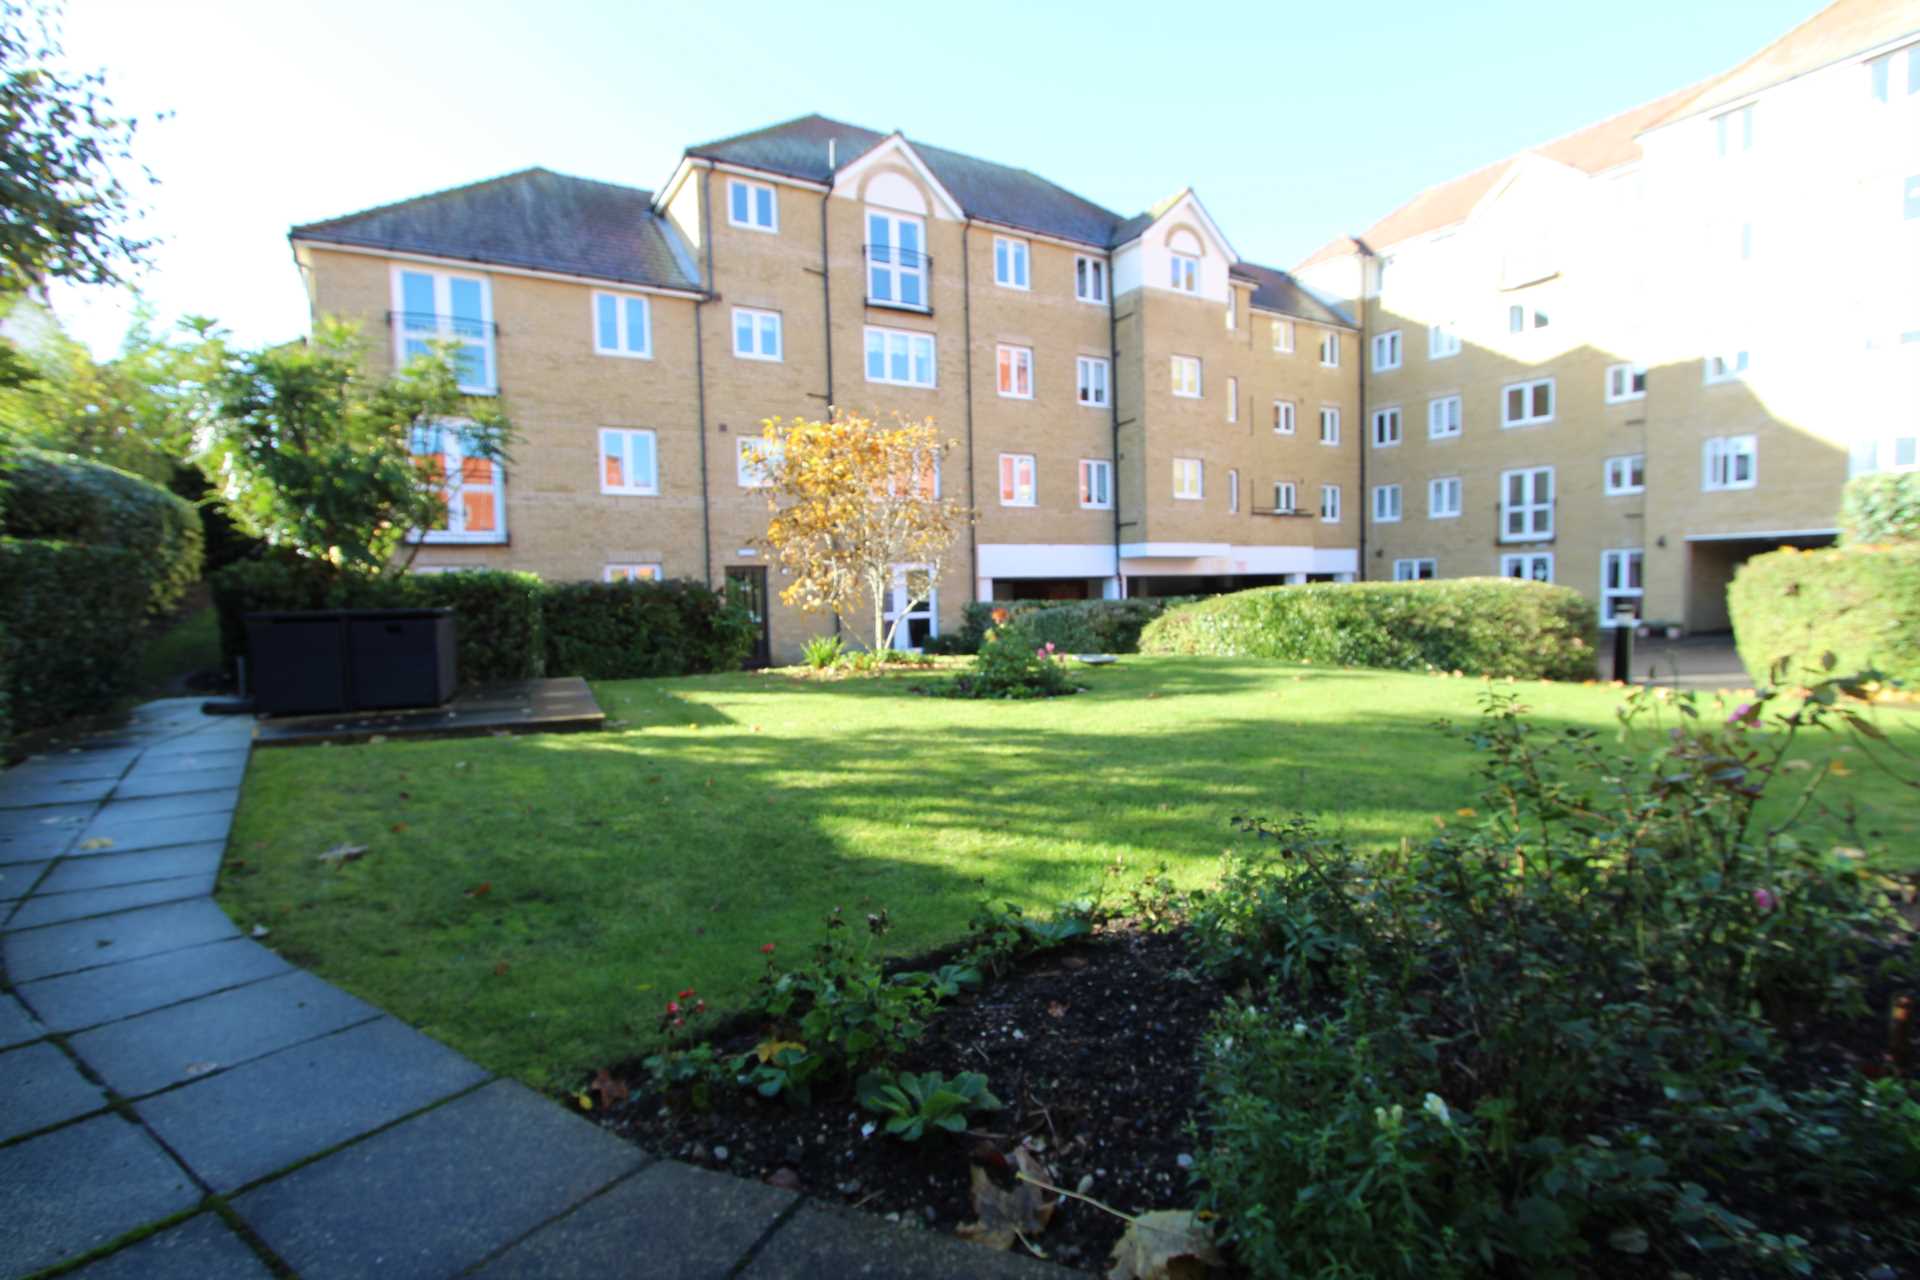 Retirement flat close to Town Centre, Image 8